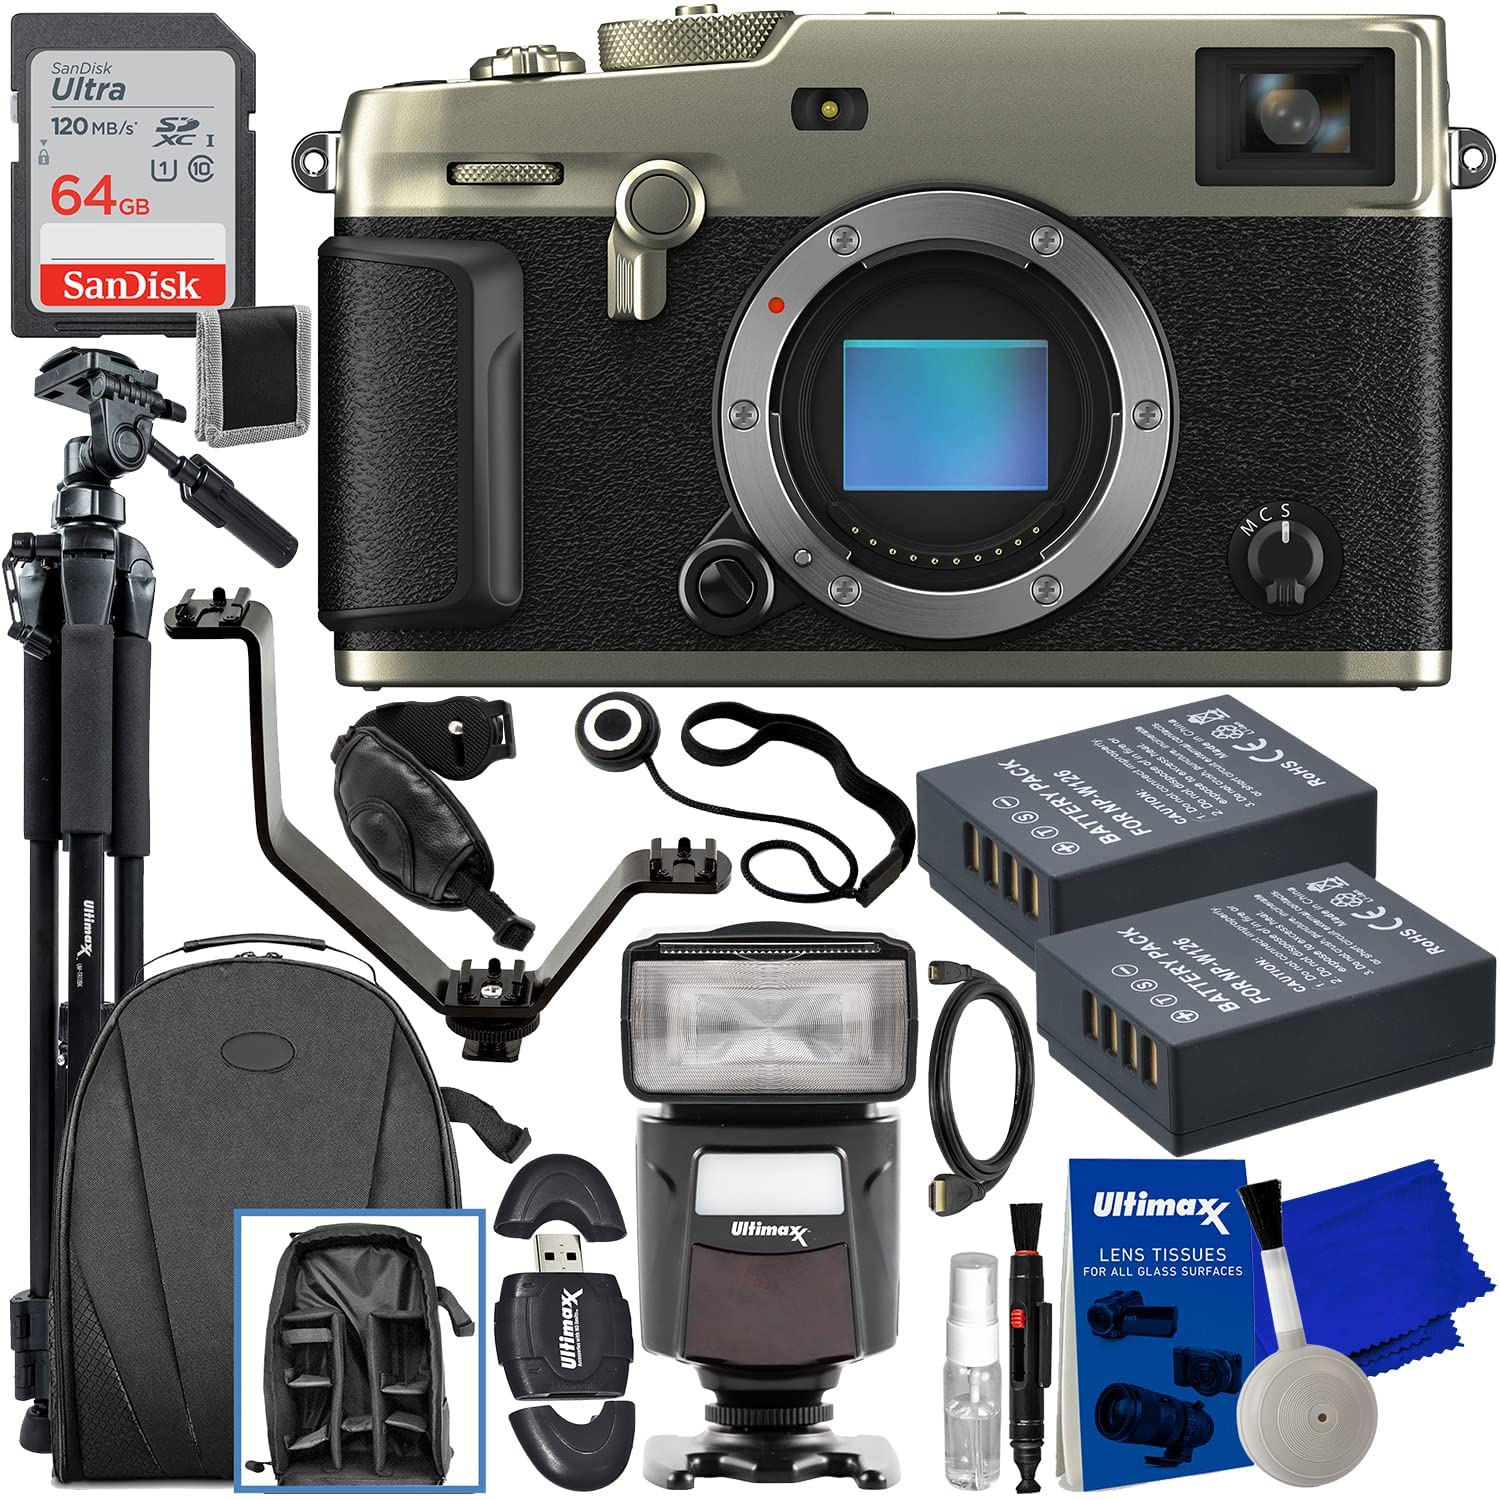 FUJIFILM X-Pro3 Mirrorless Camera (Body Only, Dura Silver) + SanDisk 64GB Ultra SDXC Memory Card, Water-Resistant Camera Backpack, 2X Replacement Batteries & Much More (28pc Bundle)